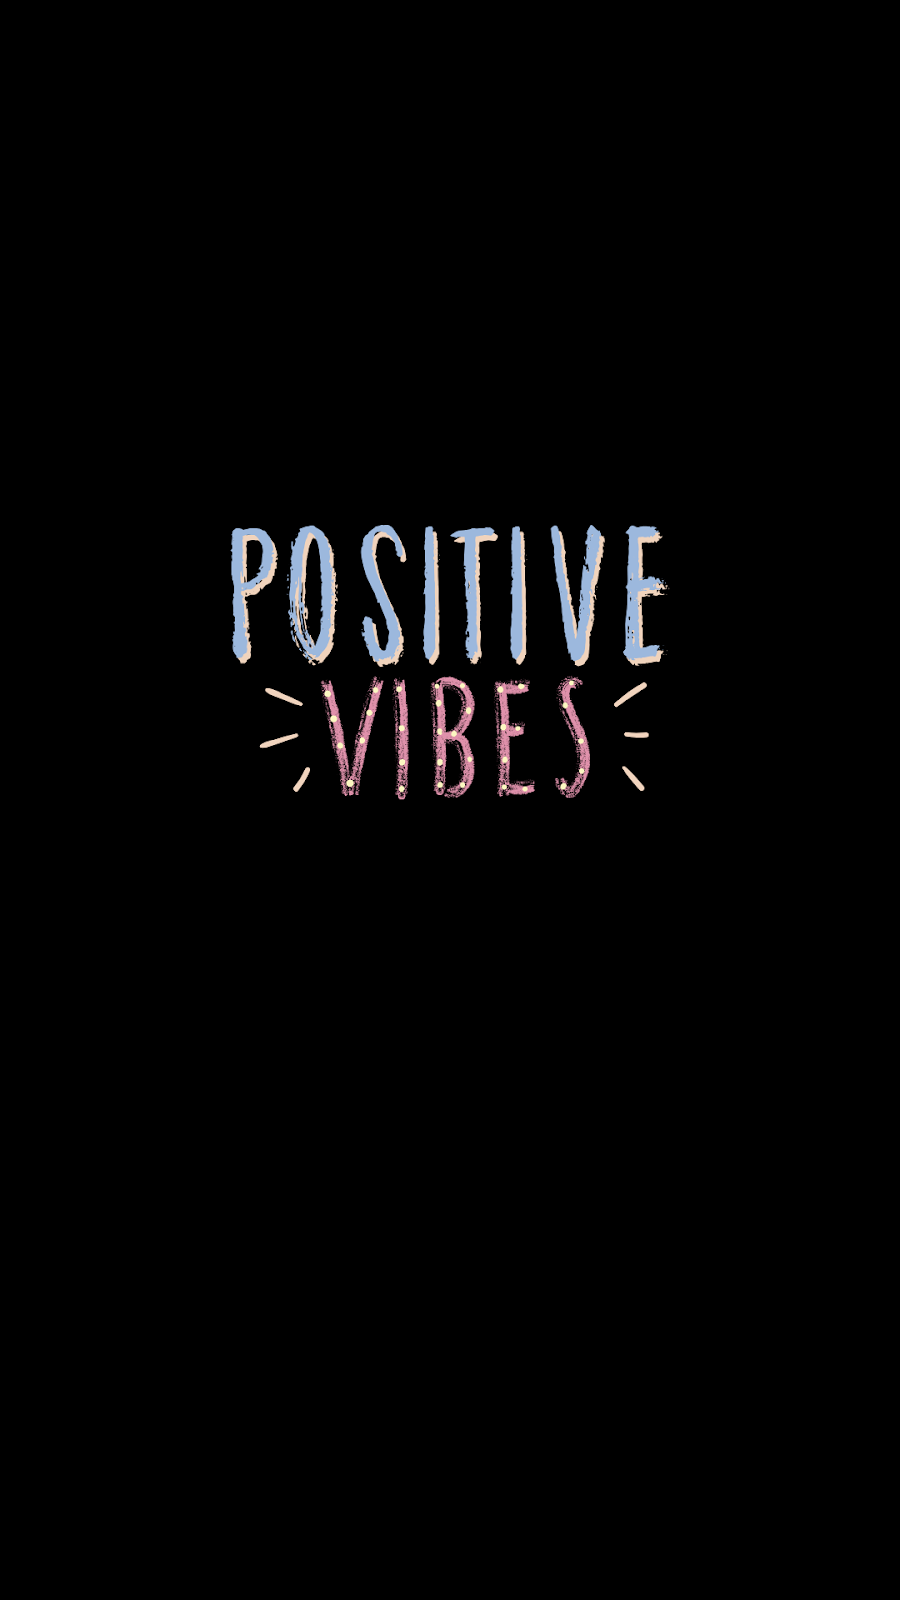 Details more than 60 good vibes aesthetic wallpapers best - in.cdgdbentre